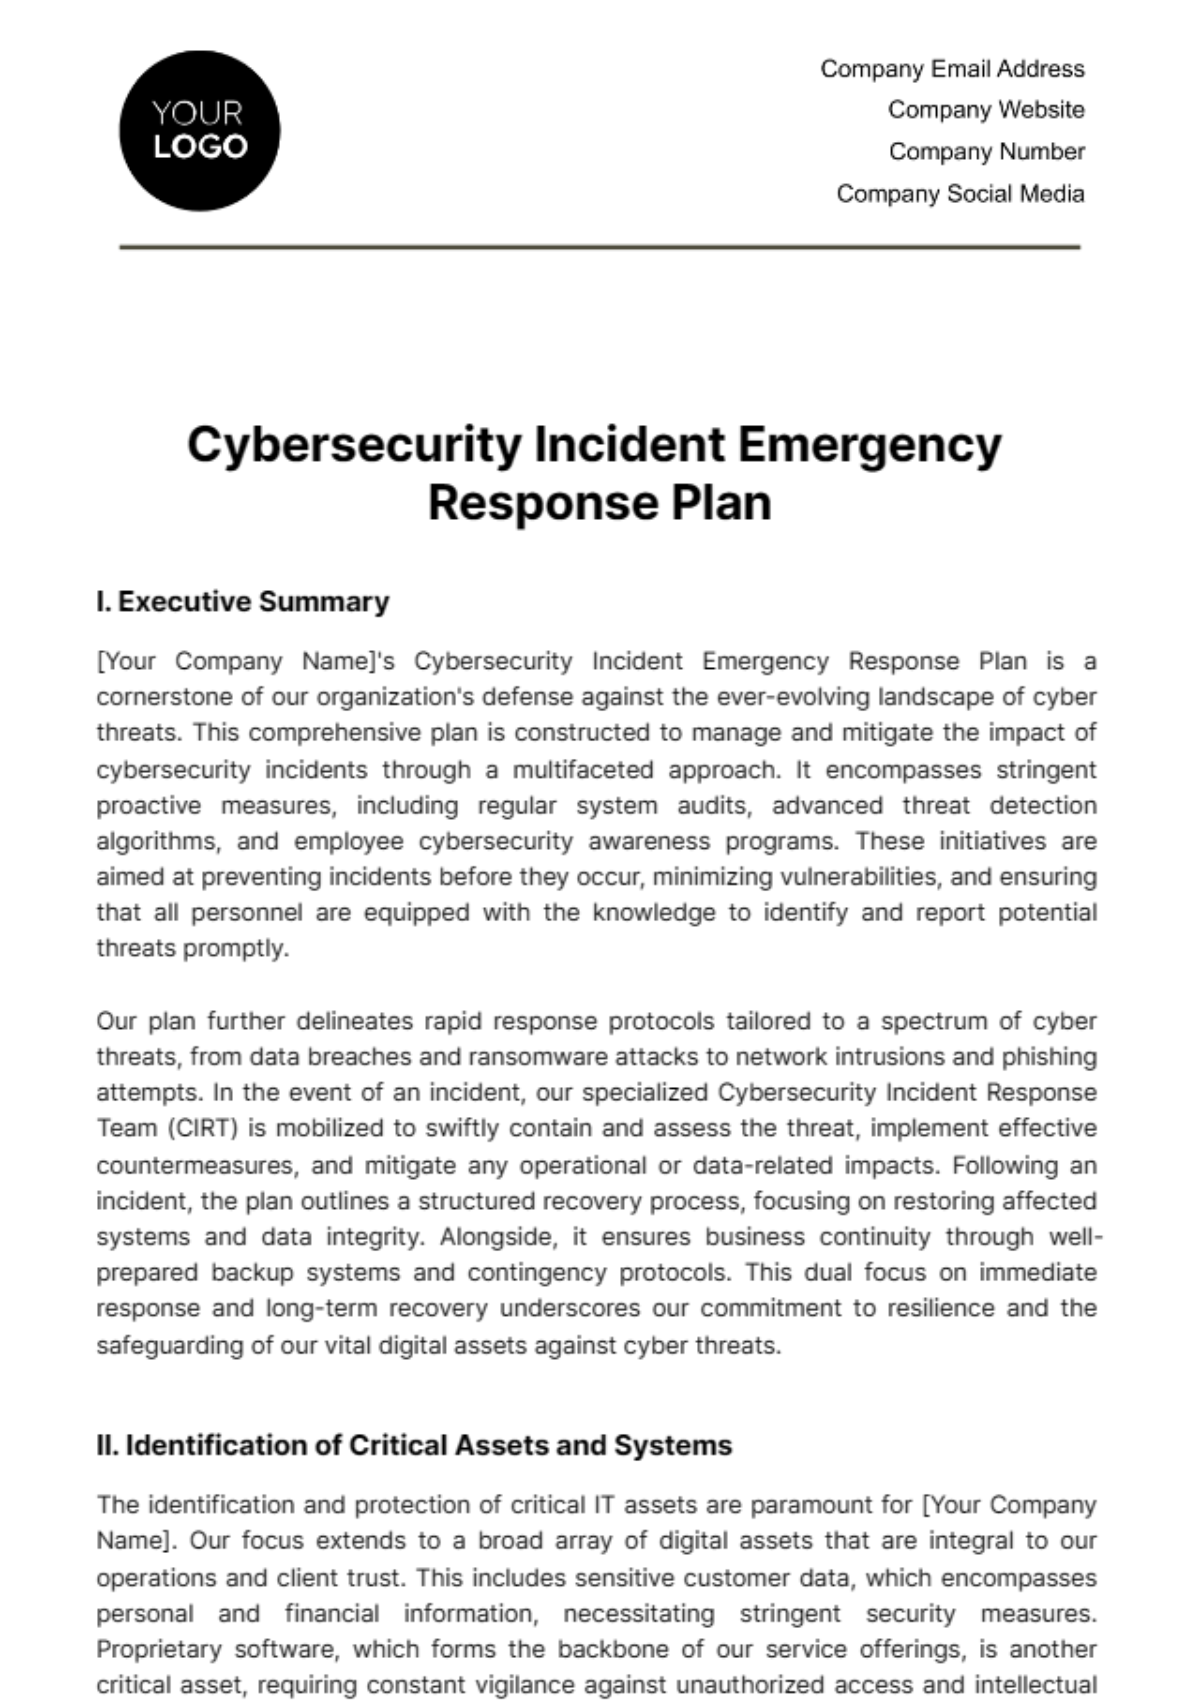 Free Cybersecurity Incident Emergency Response Plan Template